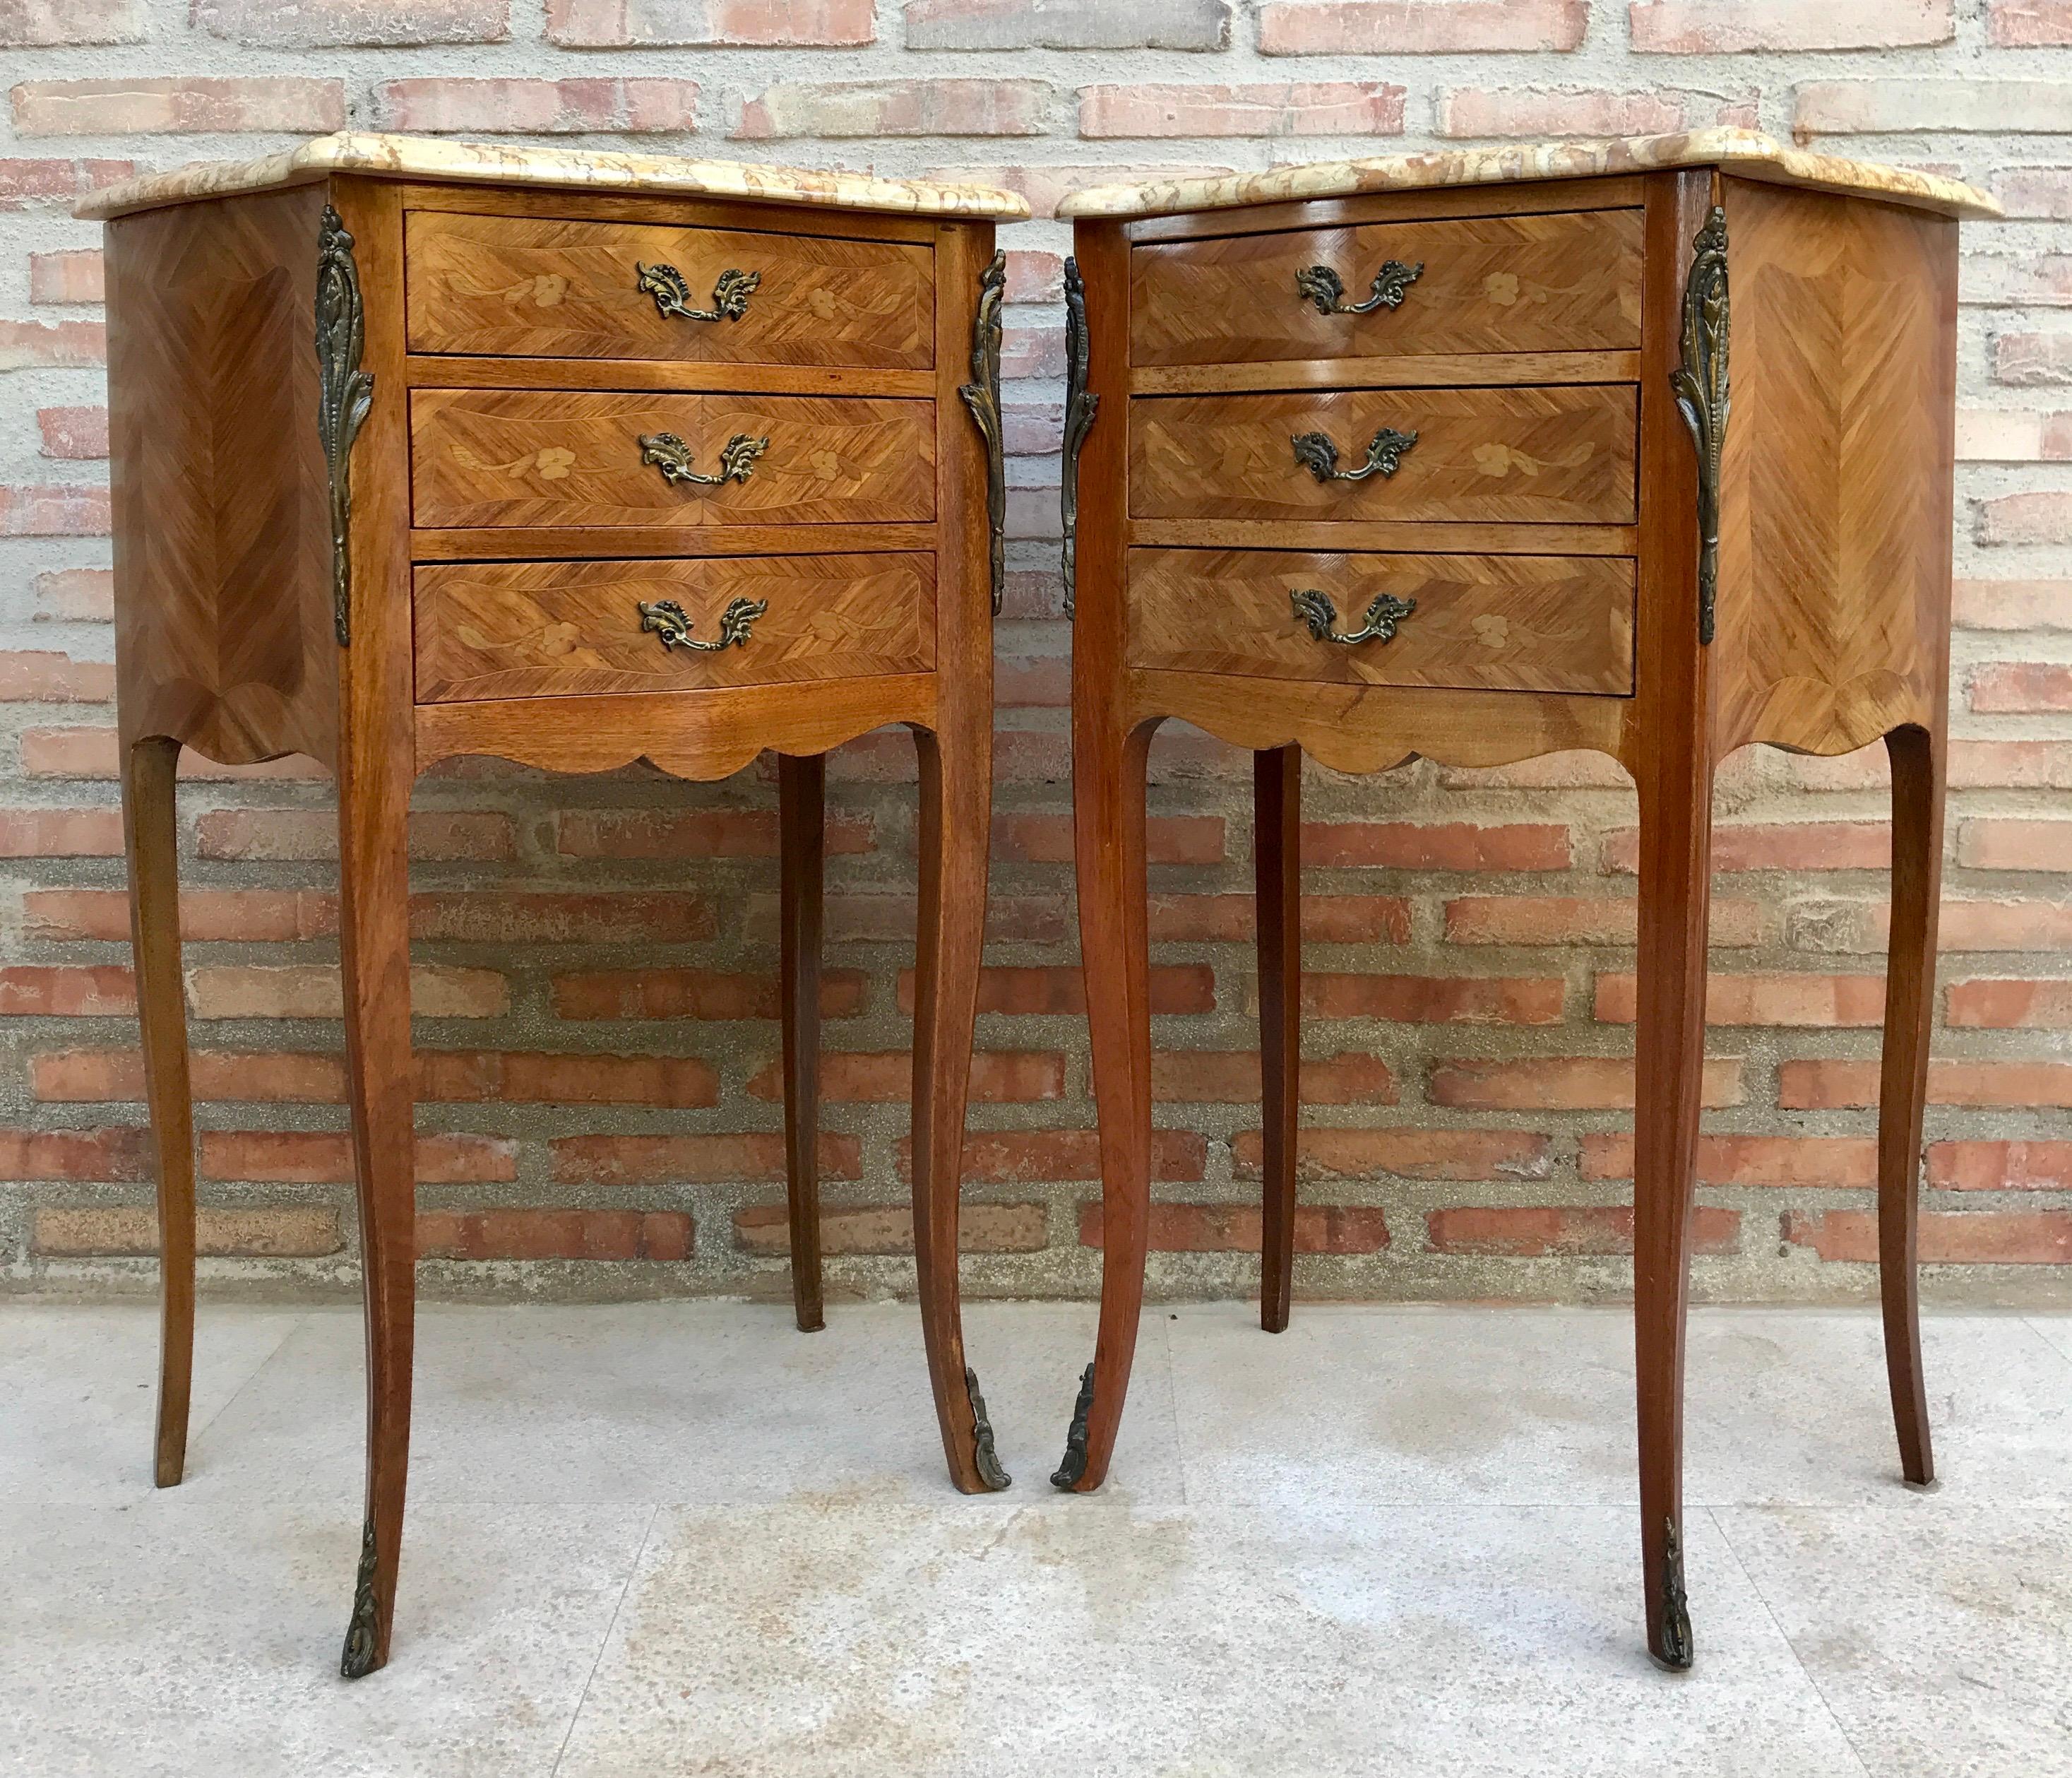 Pair of bedside tables or side tables or nightstands in French walnut with marquetry and marble top from the mid-20th century. 
A pair of fine French nightstands or walnut nightstands. Each one has a square top with a marble top and three drawers